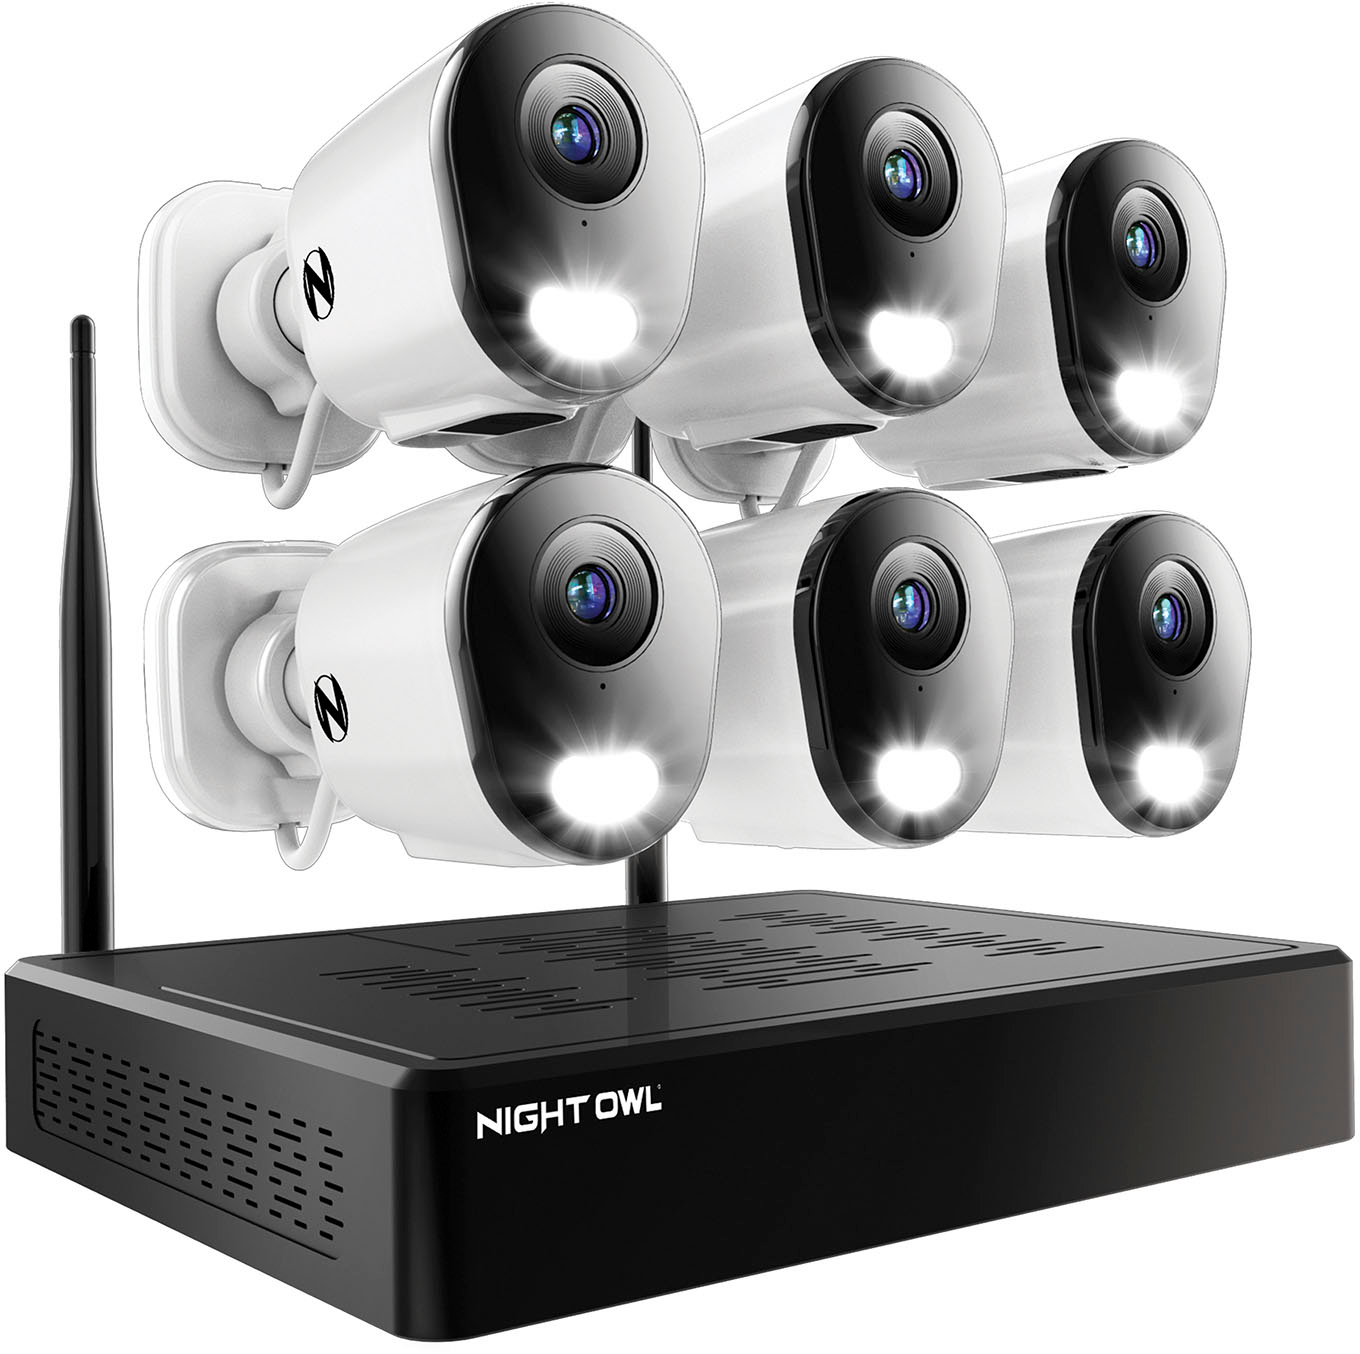 Night Owl Plug-in Wireless Outdoor Security Camera (4-Pack) at